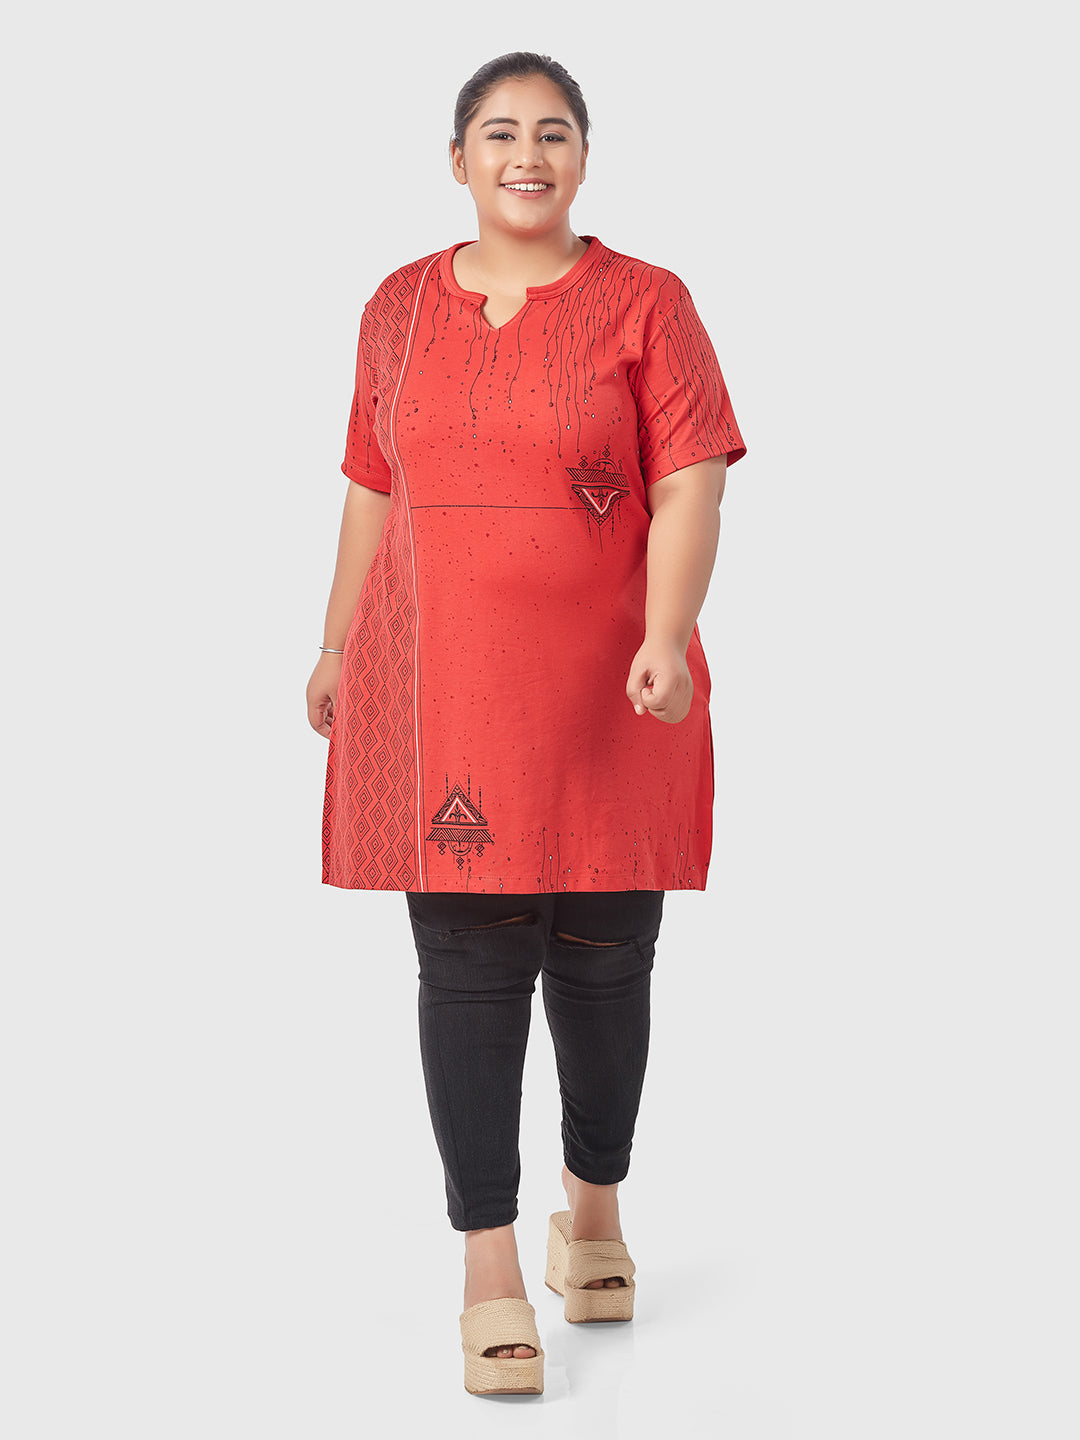 Comfortable Half Sleeves Printed Long Tops For Women In Plus Size -Red